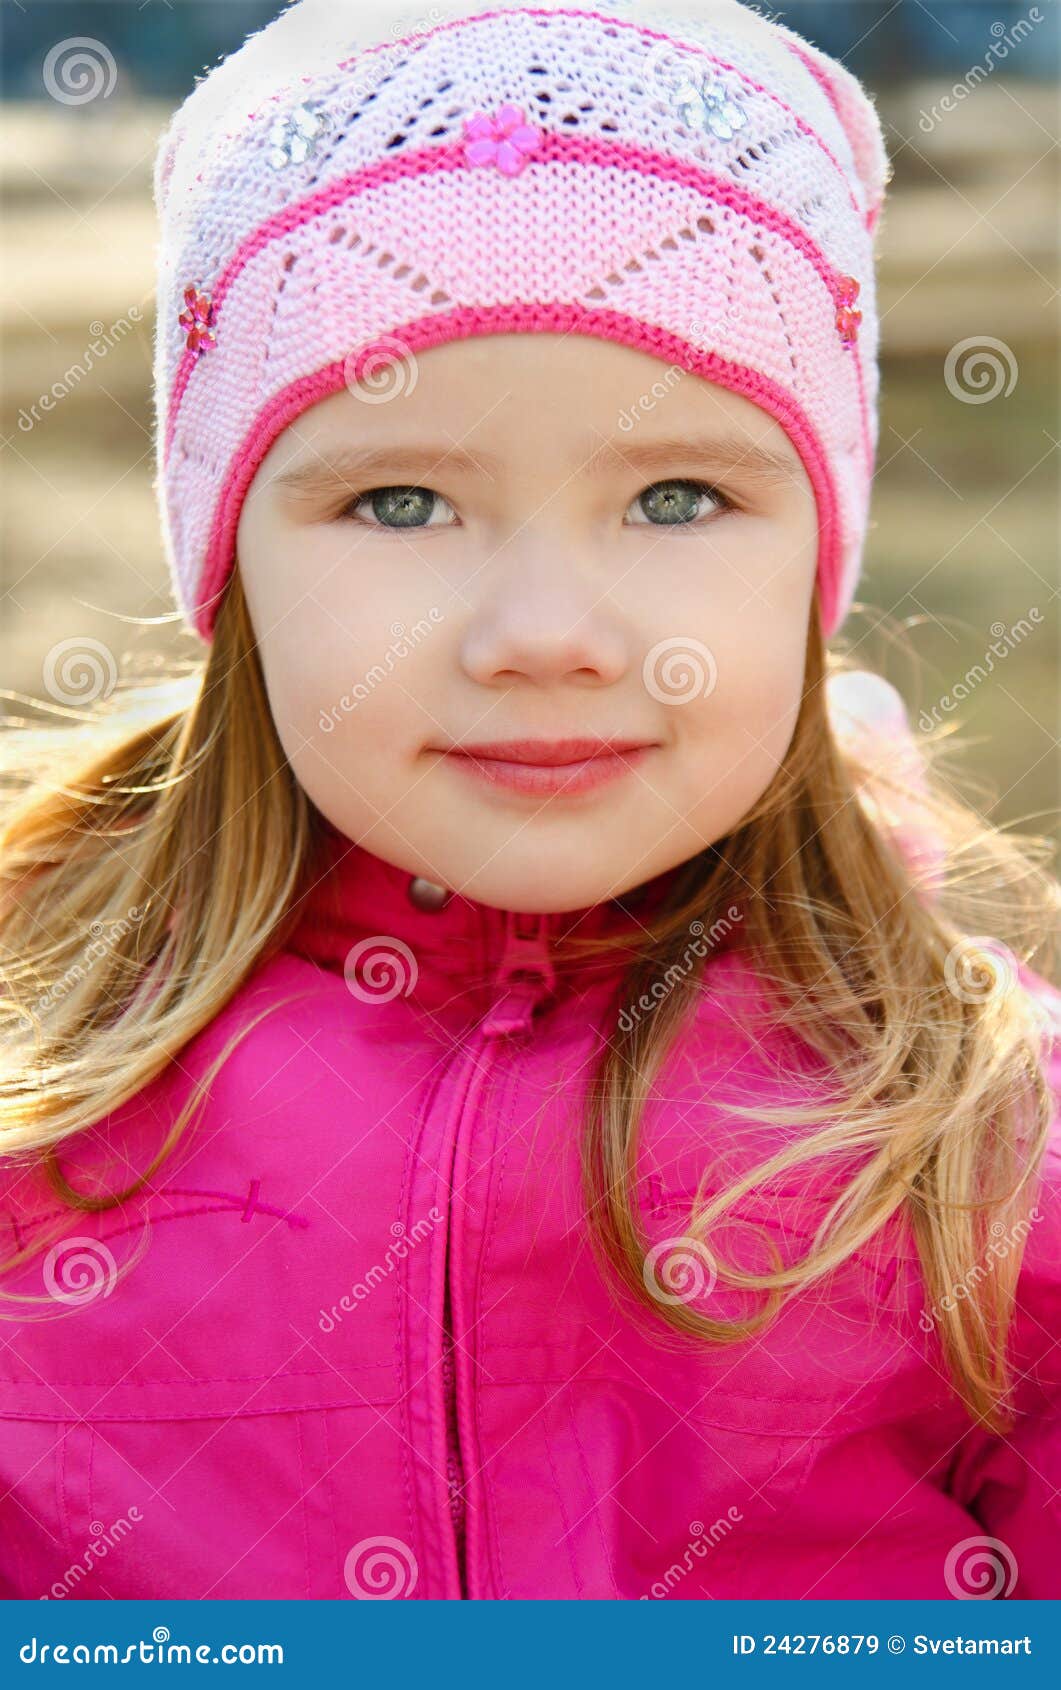 Portrait of Little Girl Outdoors on a Spring Day Stock Image - Image of ...